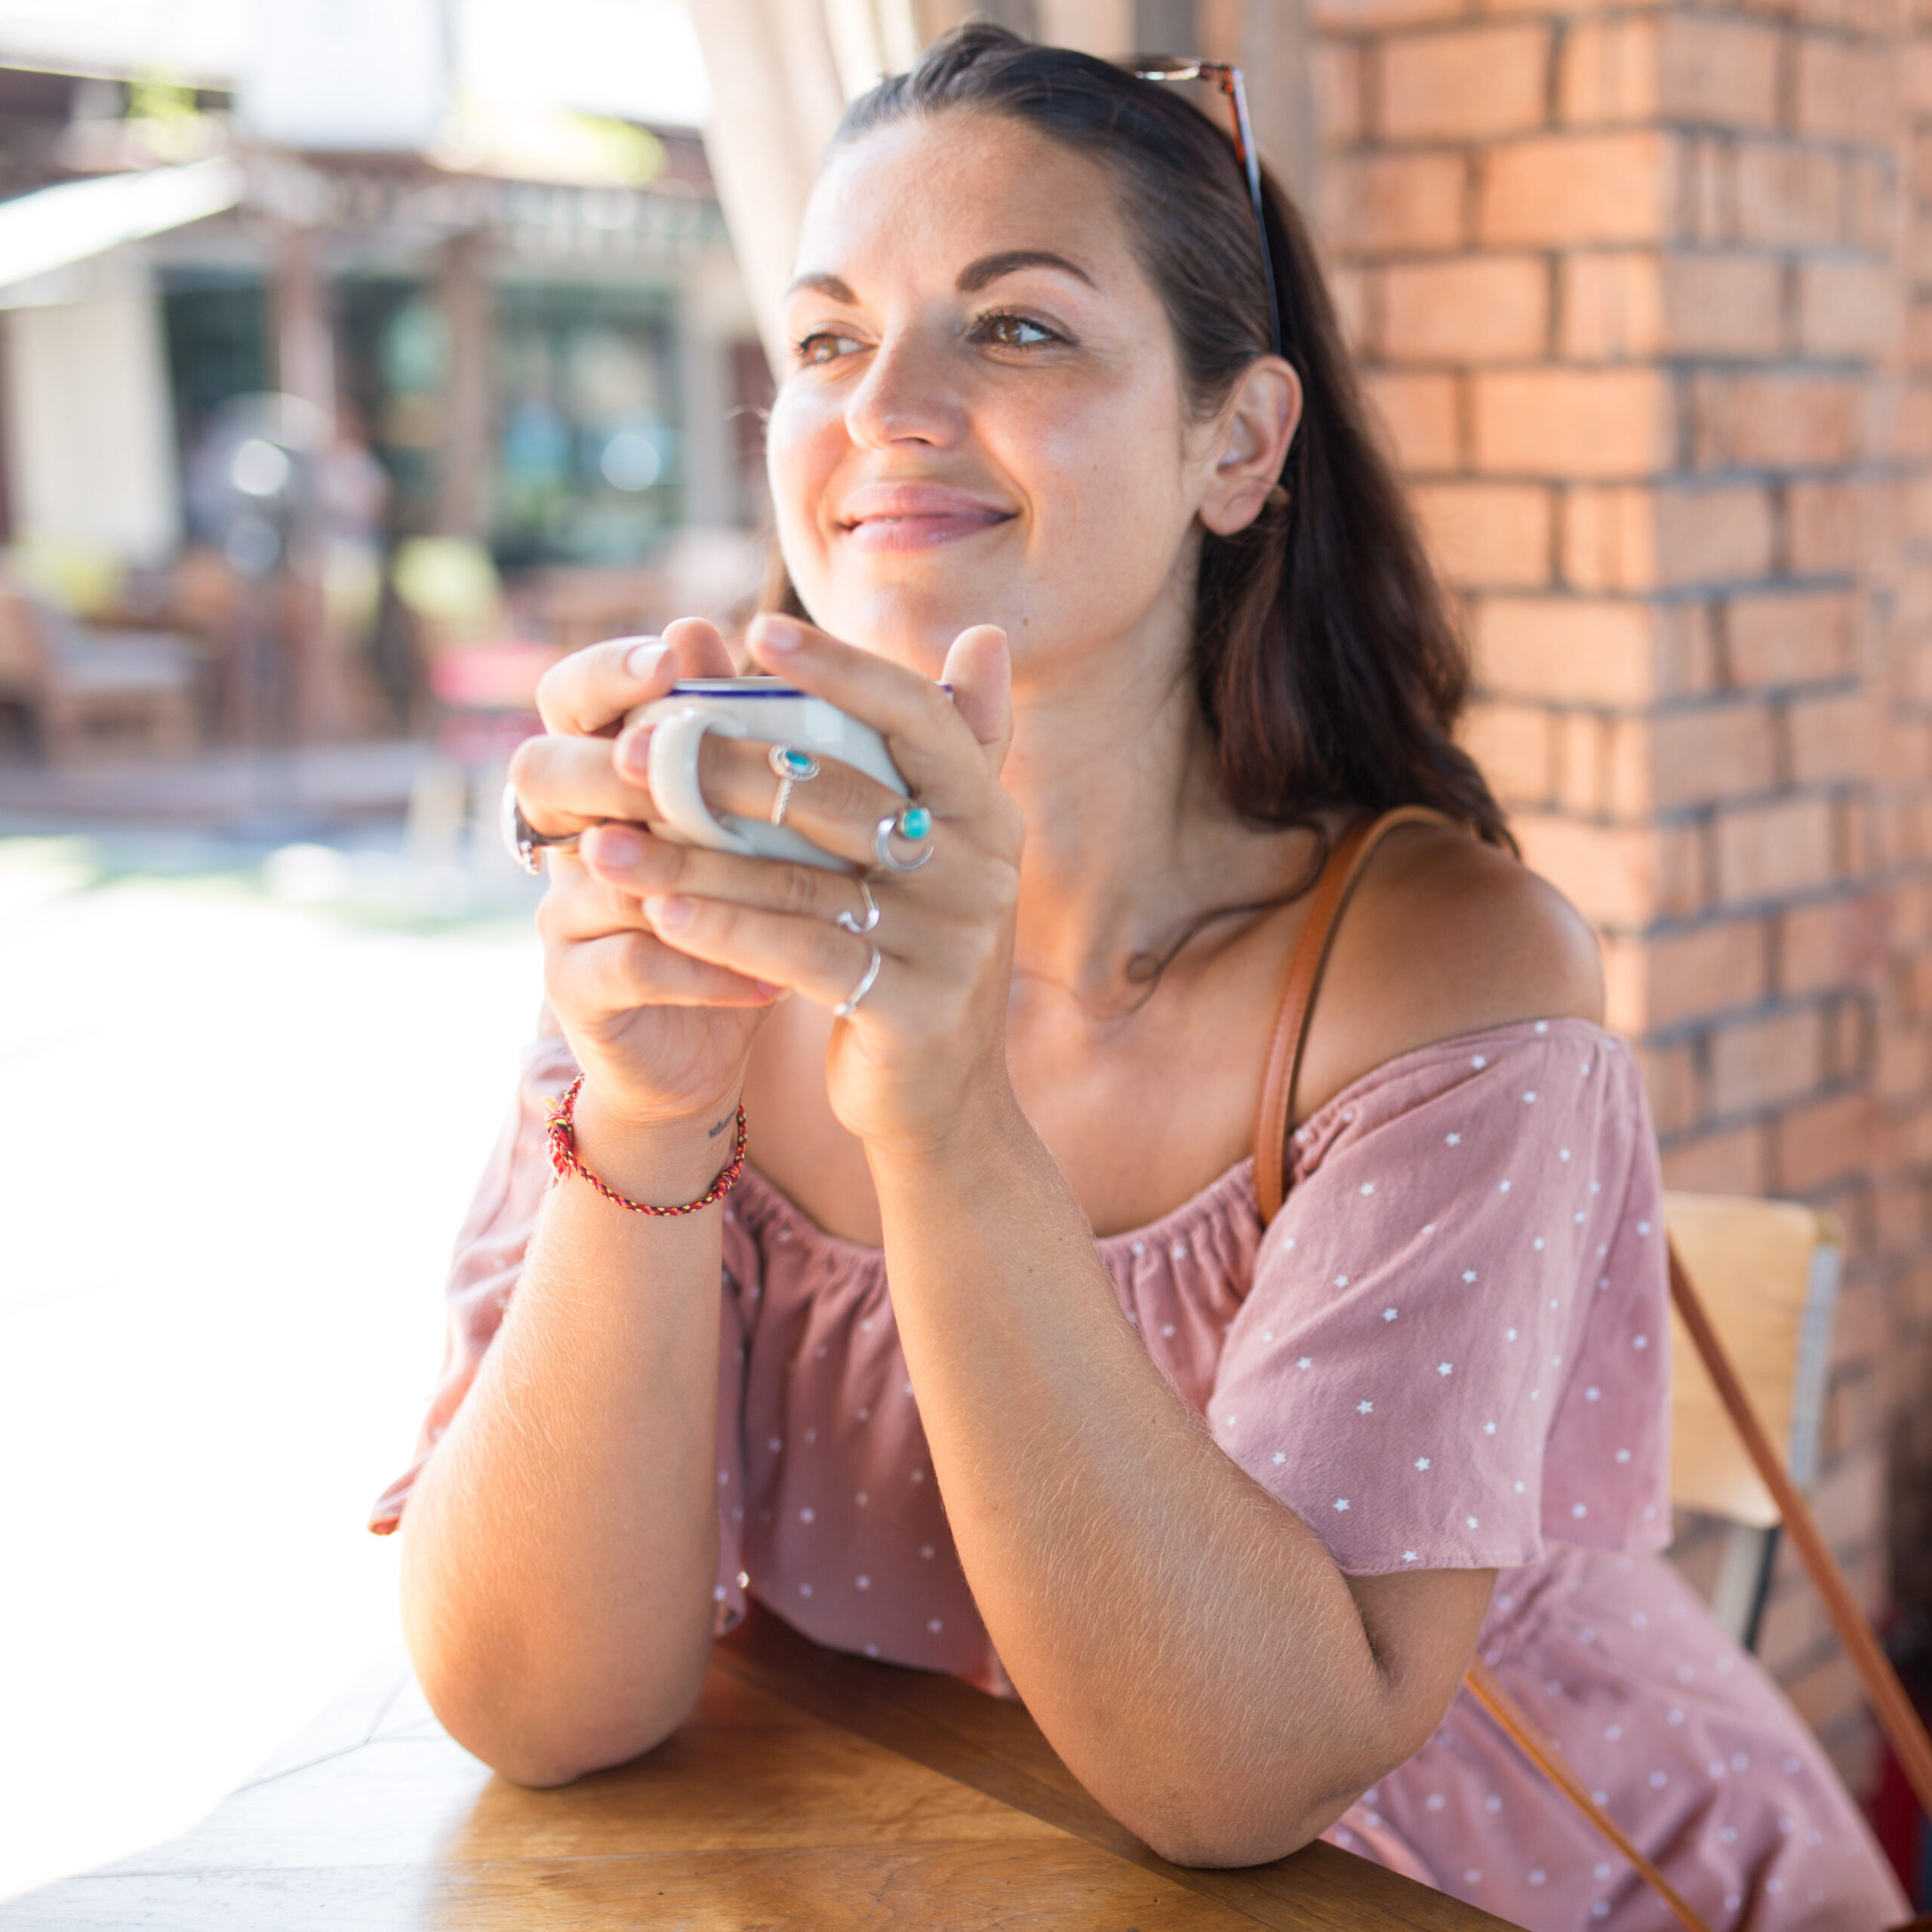 woman sitting in outdoor cafe drinking coffee and smiling